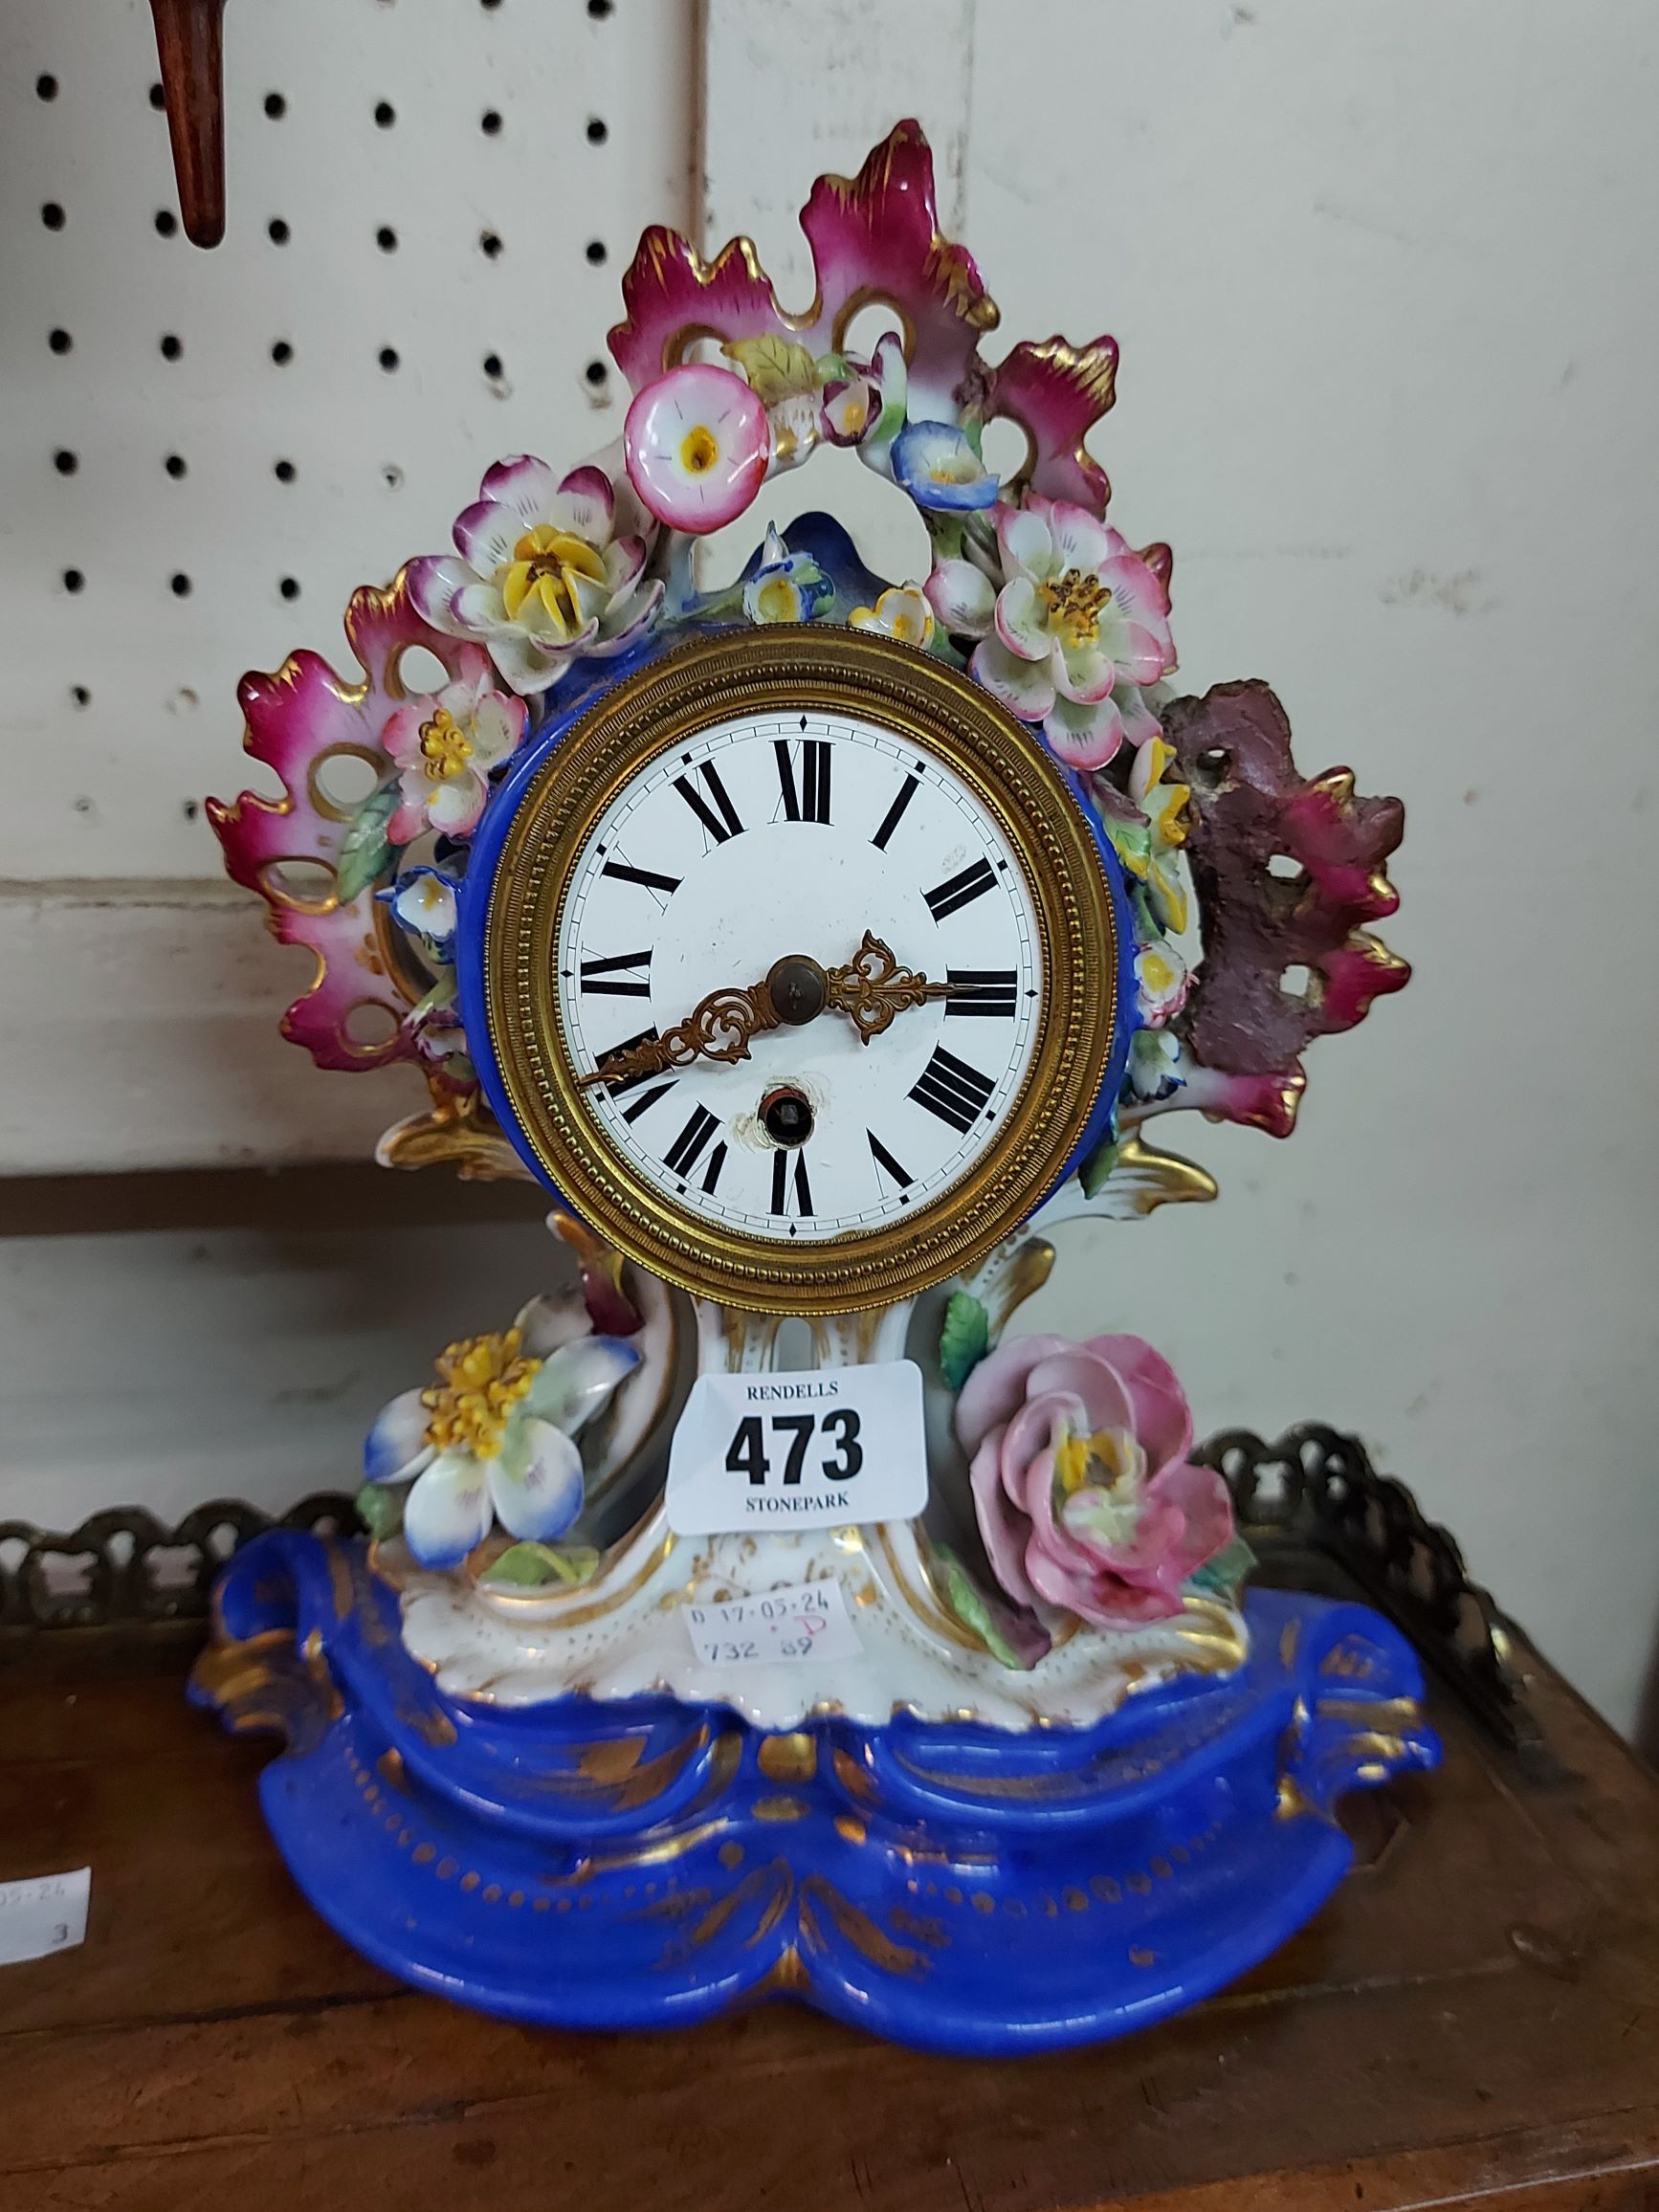 A small 19th Century ornate porcelain cased timepiece with floral encrusted decoration and simple